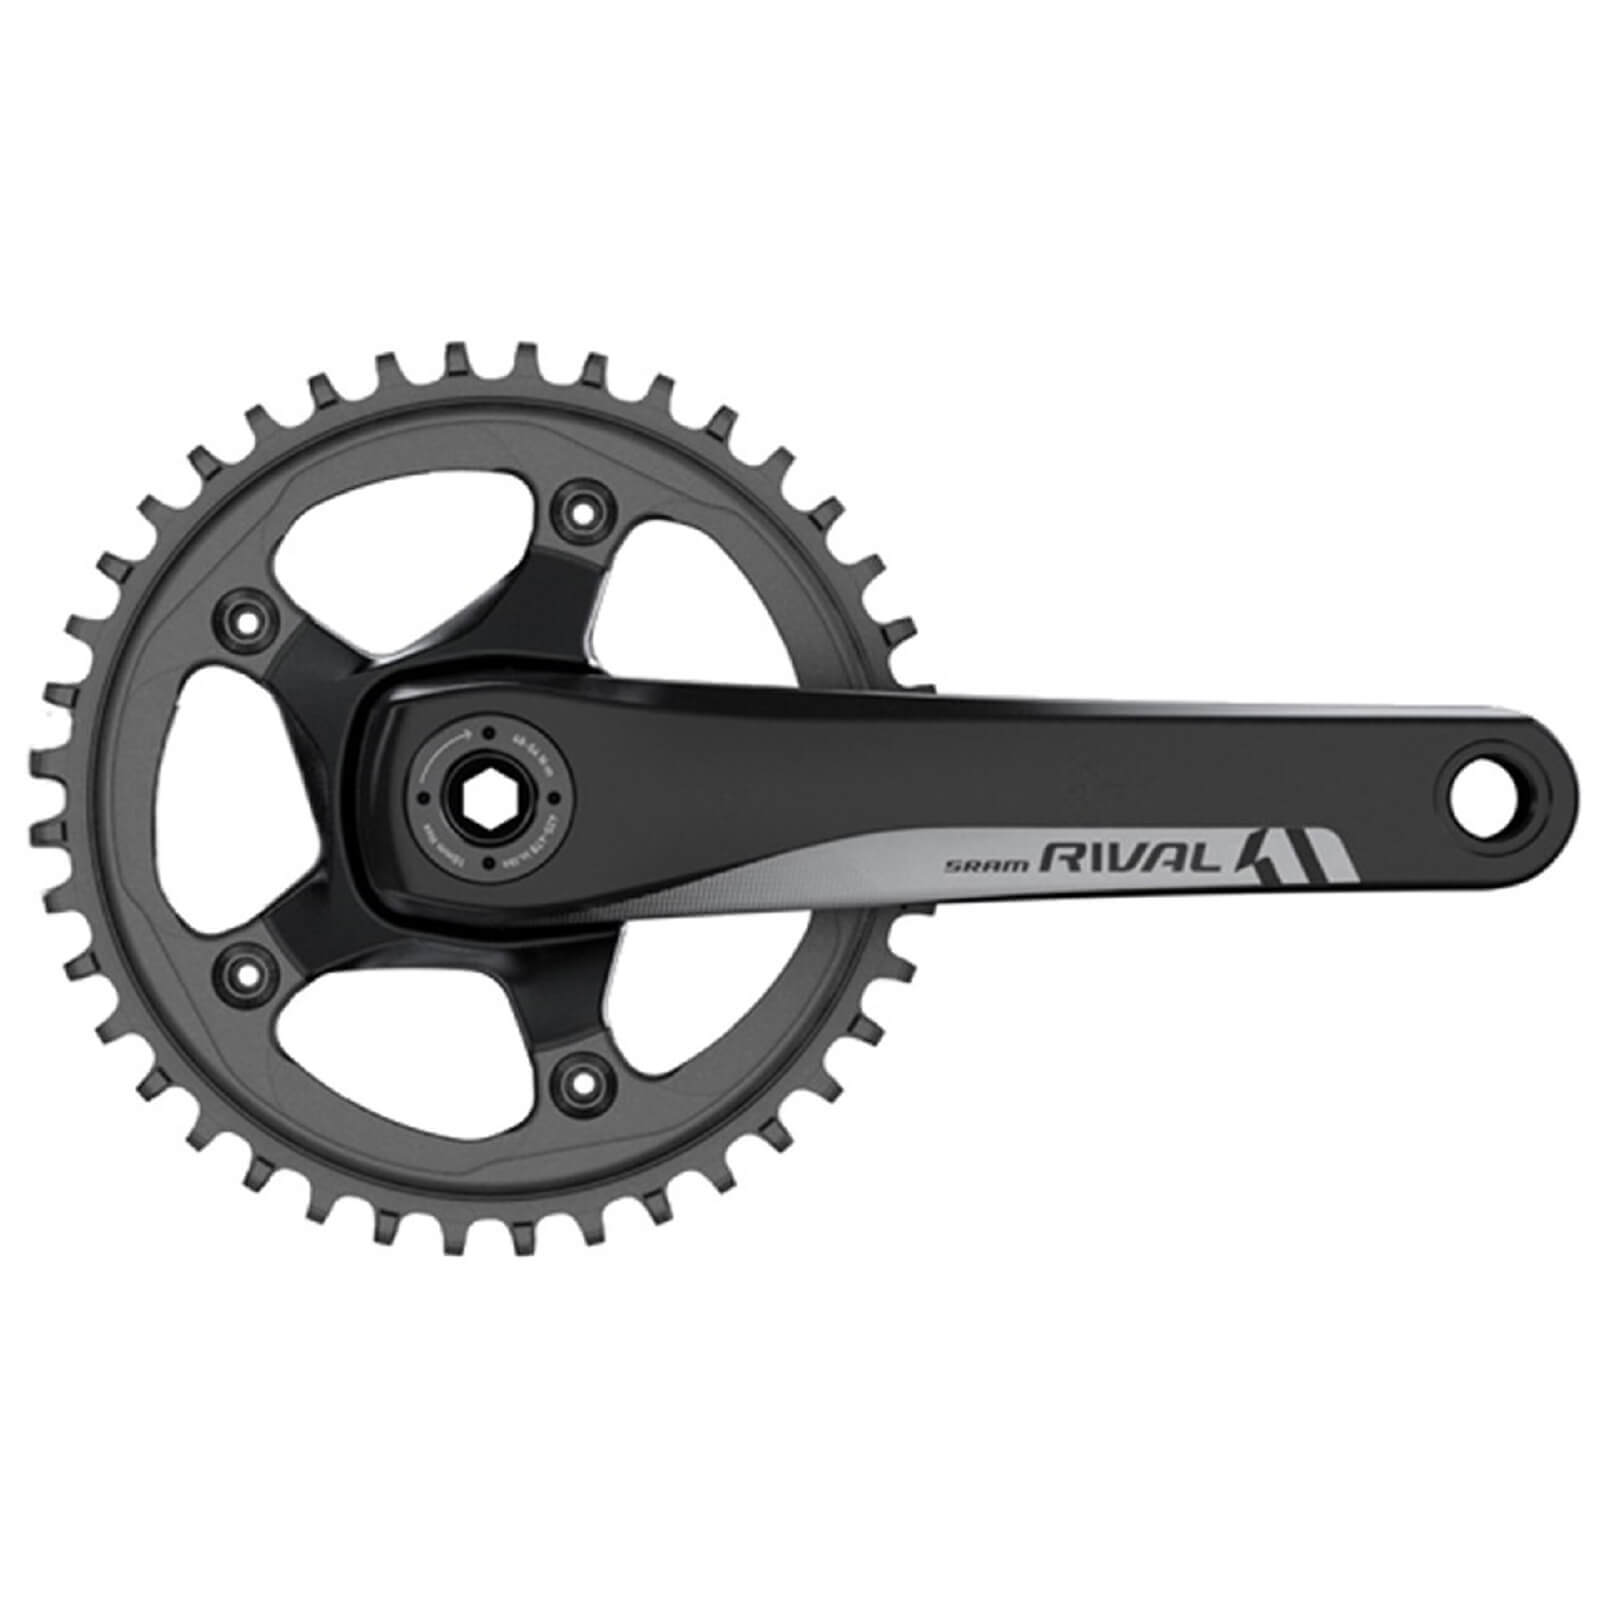 SRAM Rival1 GXP Chainset - 42T - 175mm